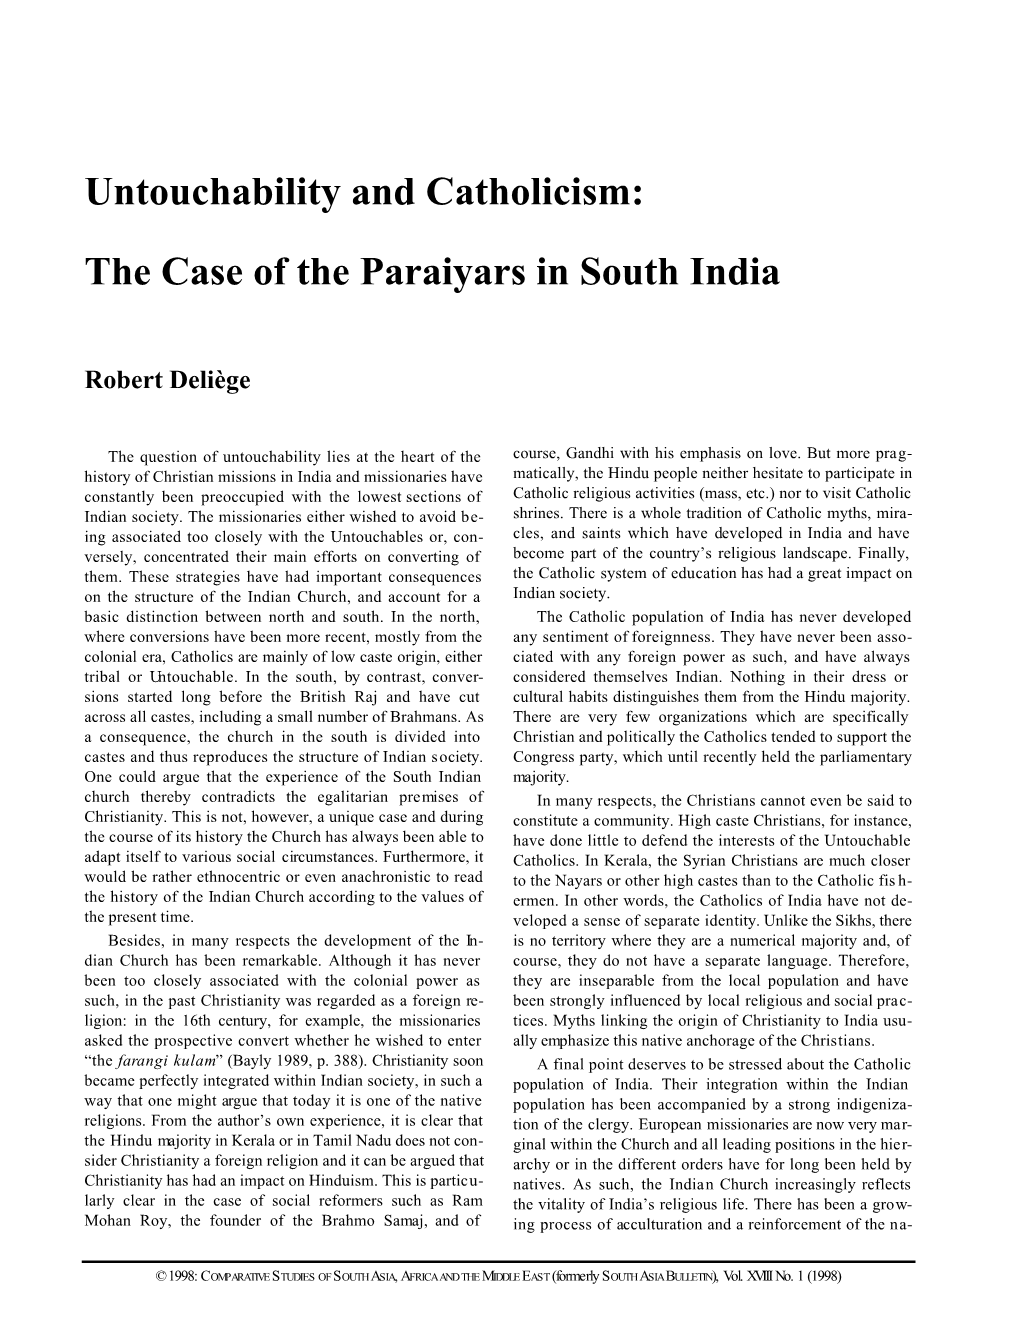 Untouchability and Catholicism: the Case of the Paraiyars in South India